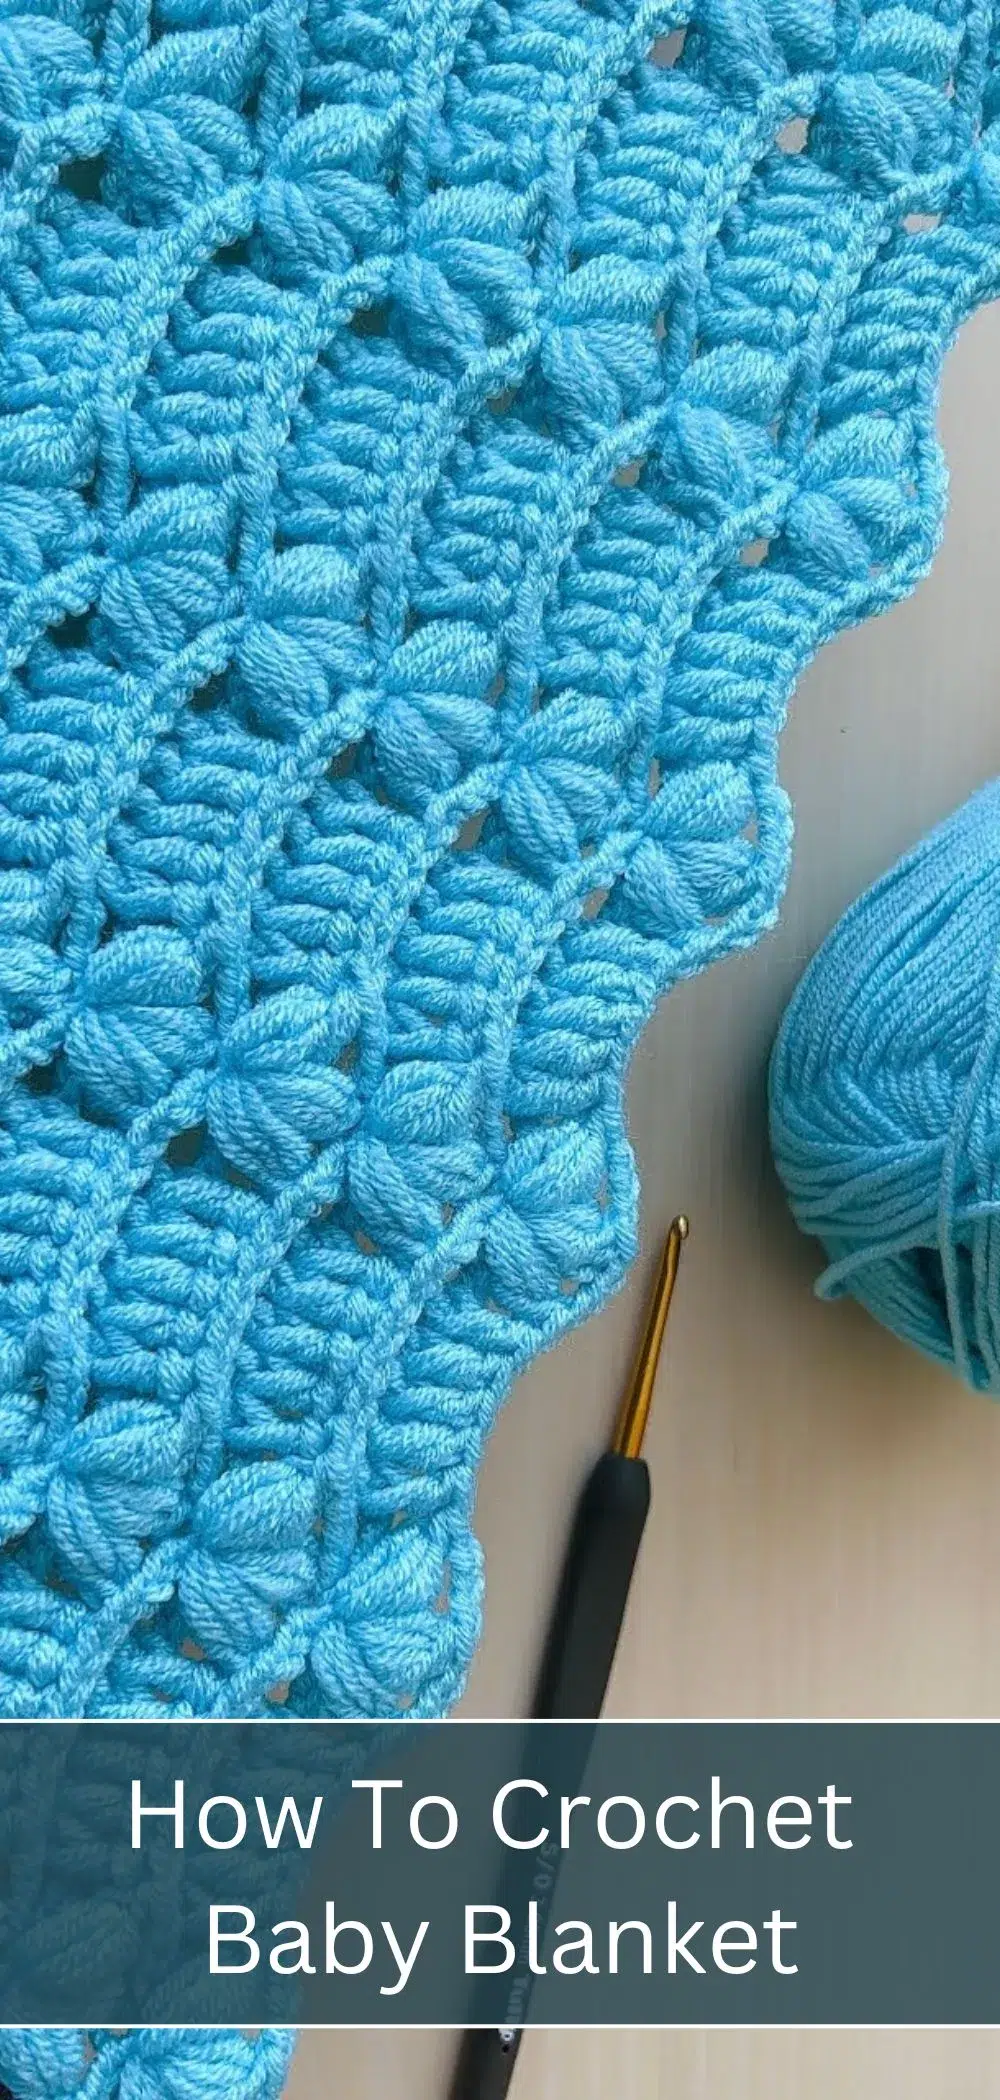 Such A Wonderful crochet baby blanket can be done by beginners. You will use simple crochet techniques in this project.